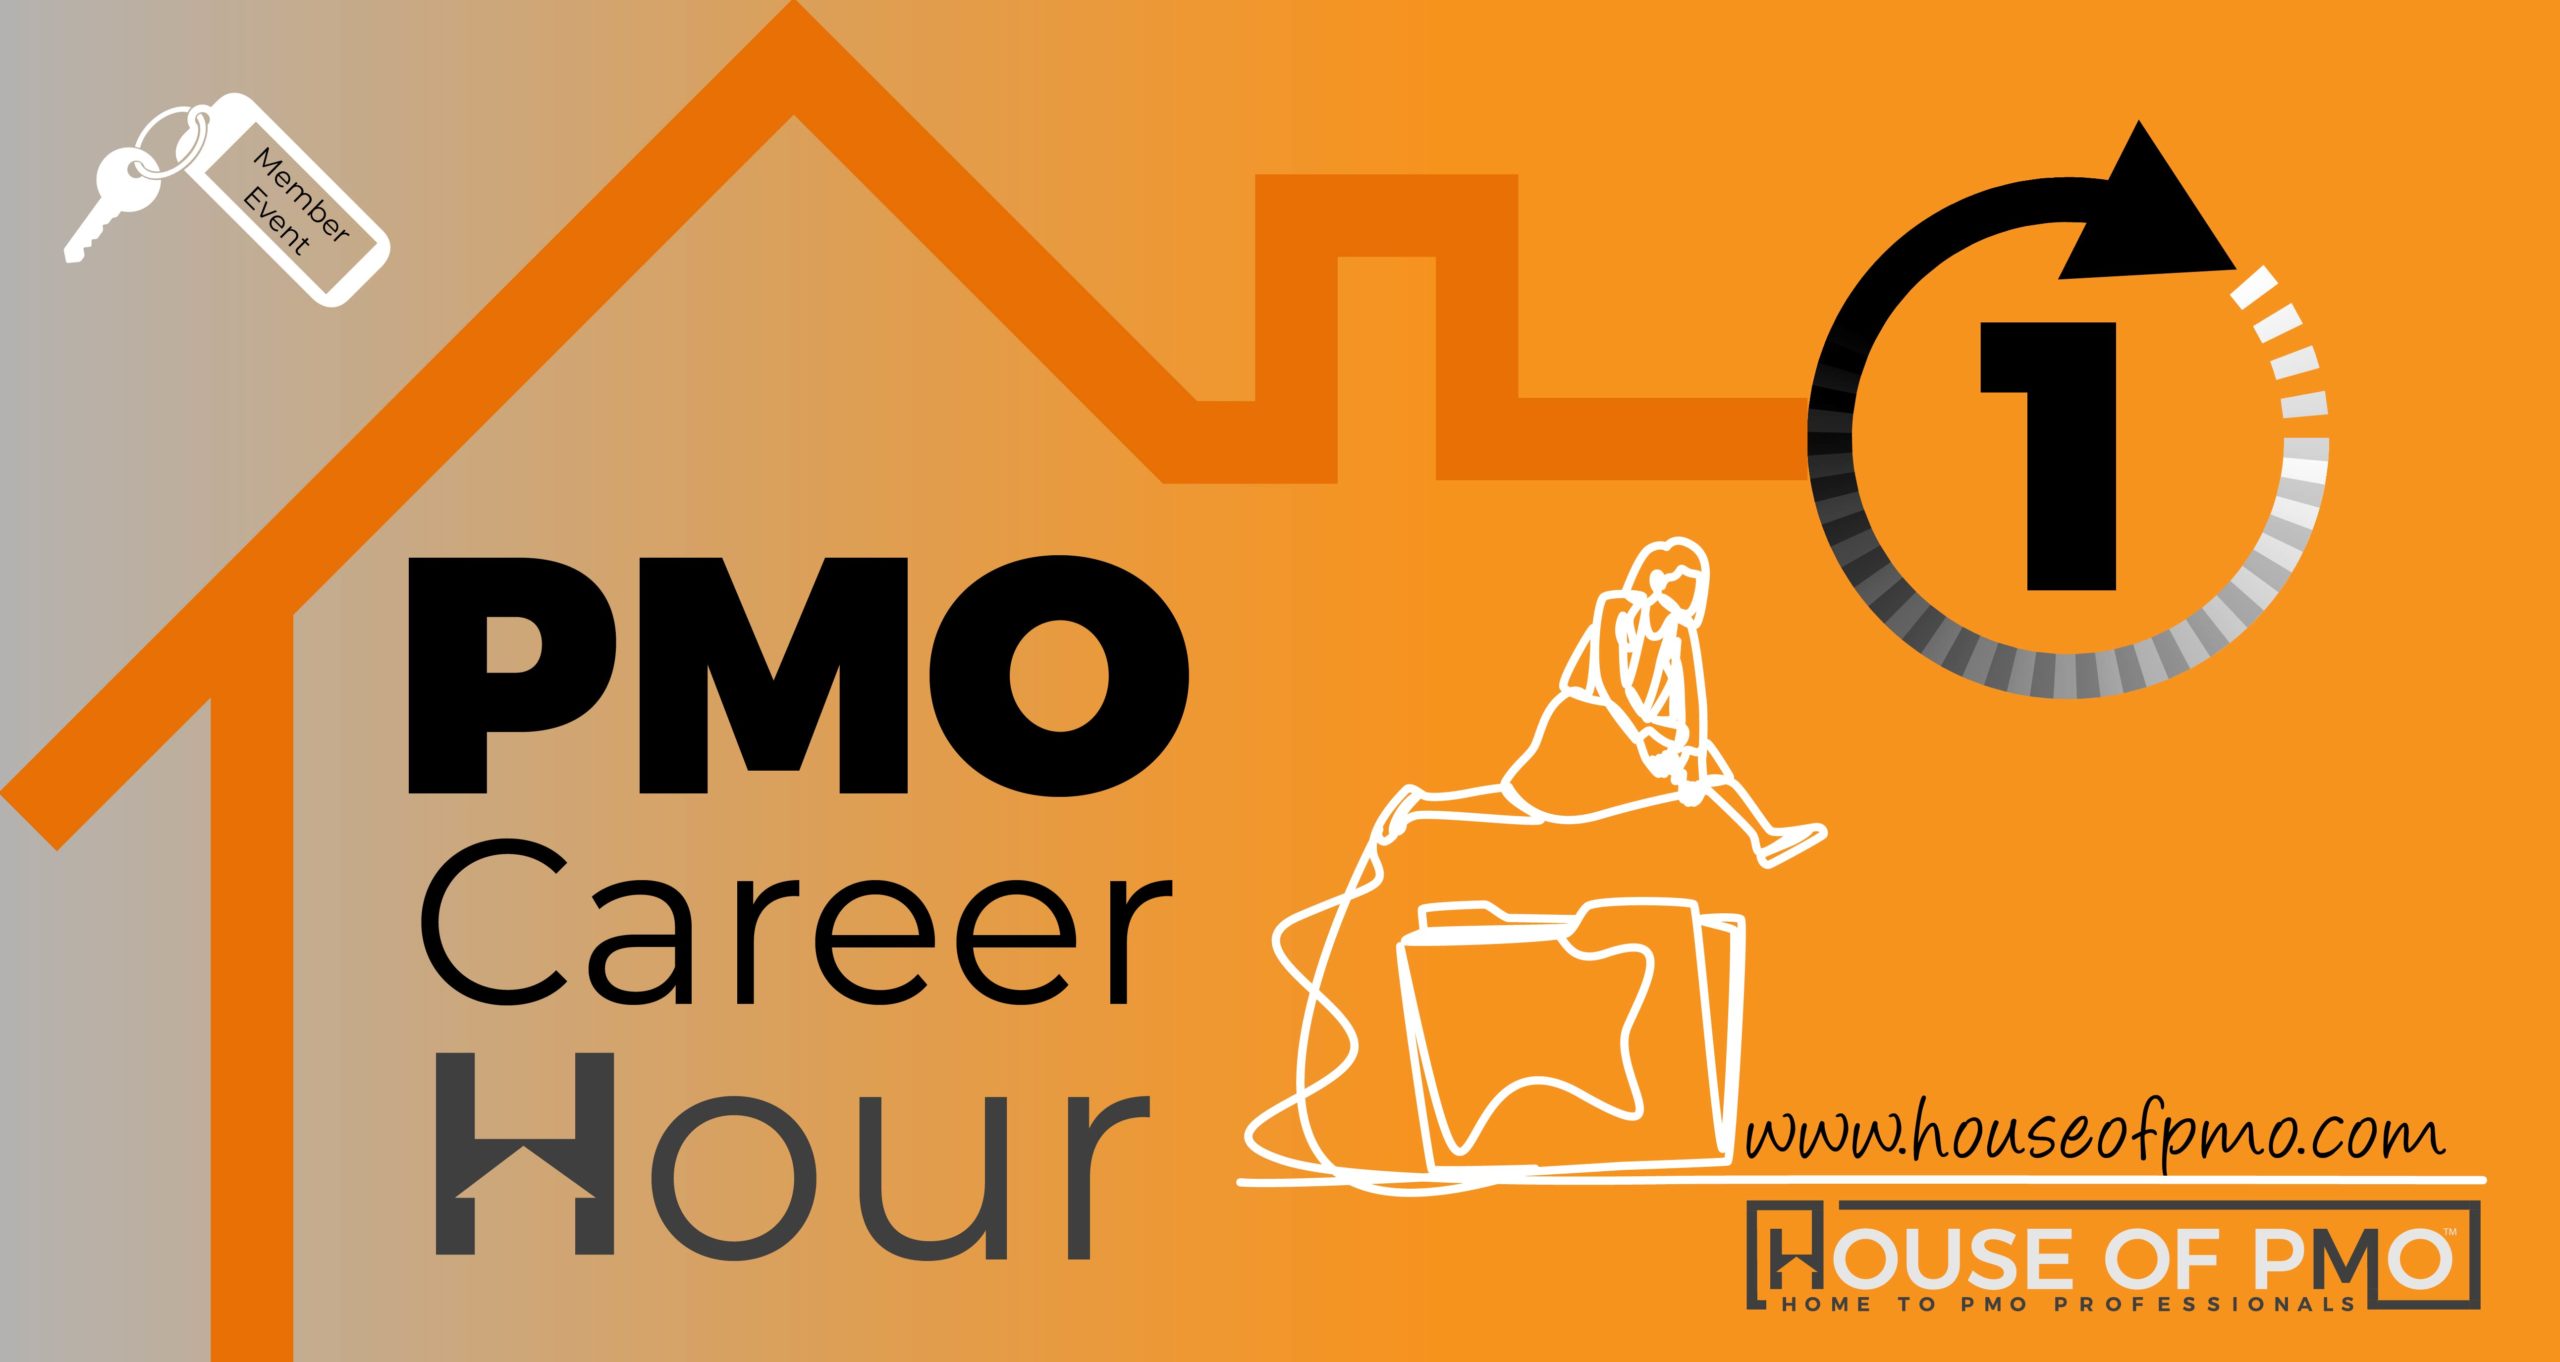 A woman jumping over a filing system is show on this image to advertise the PMO Career Hour event